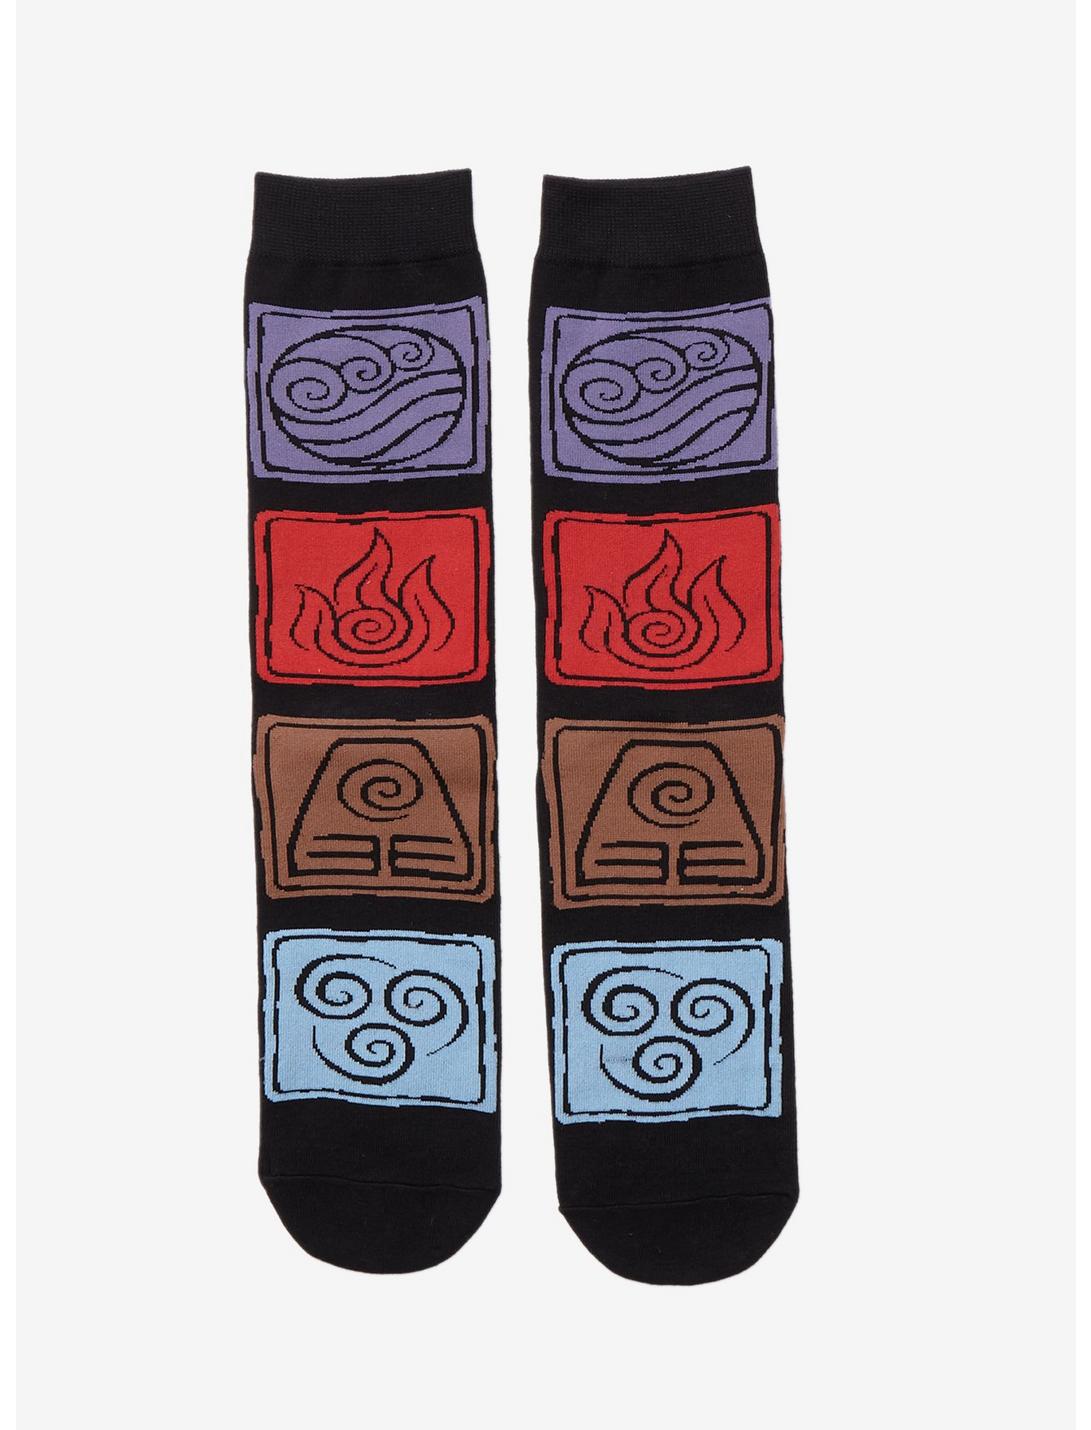 Avatar: The Last Airbender Four Nations Crew Socks, , hi-res